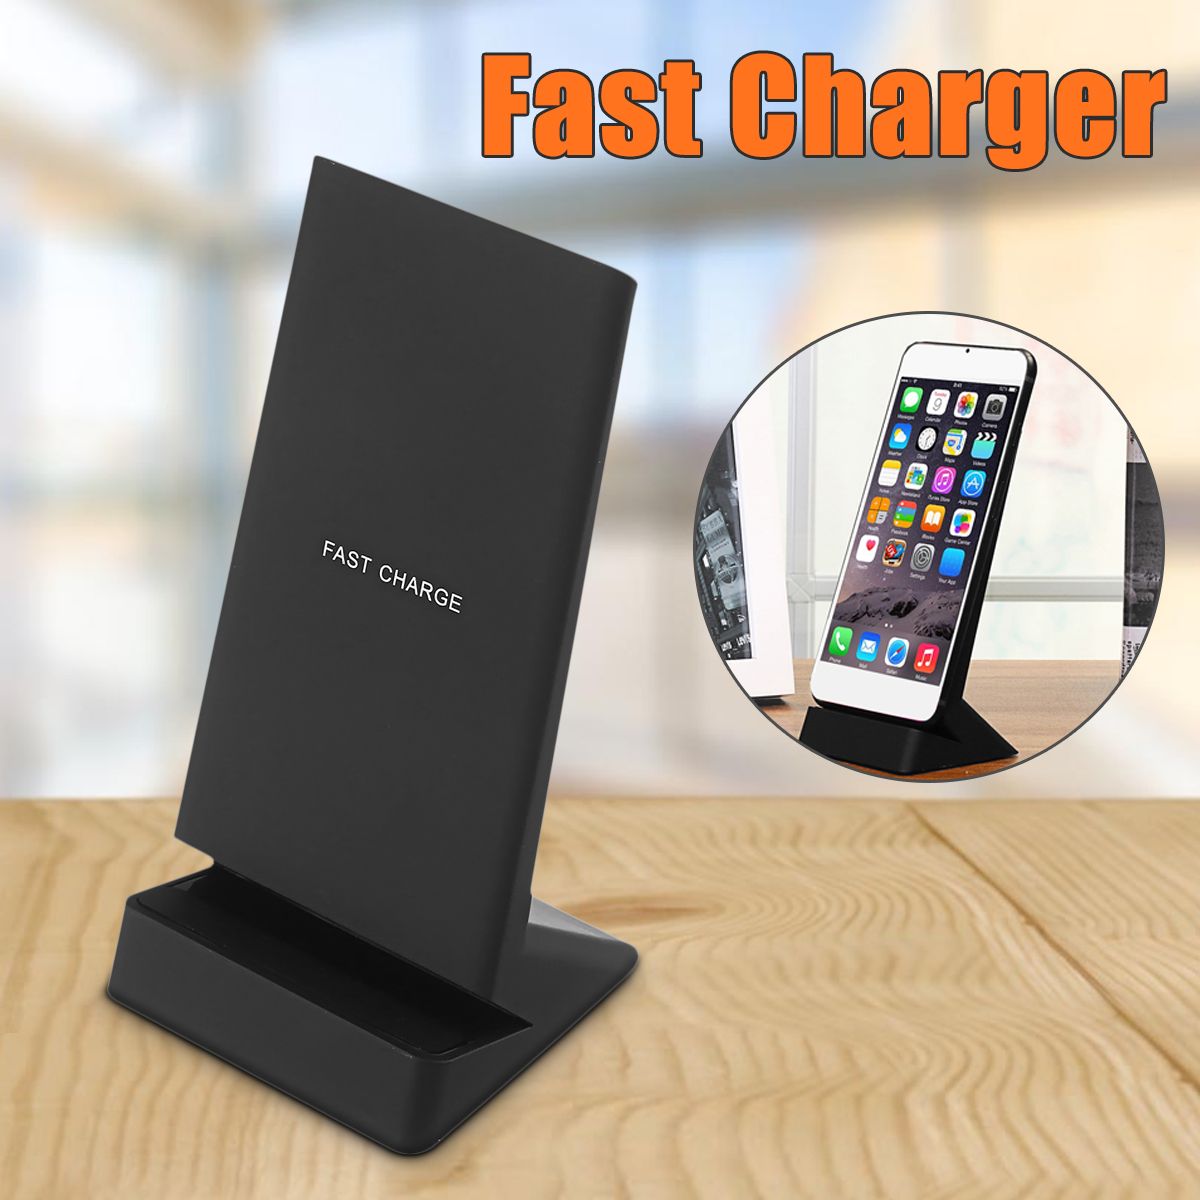 Bakeey-Qi-Wireless-Fast-Charger-For-iPhone-X-8-8Plus-Samsung-S8-S7-Edge-Note-8-1223659